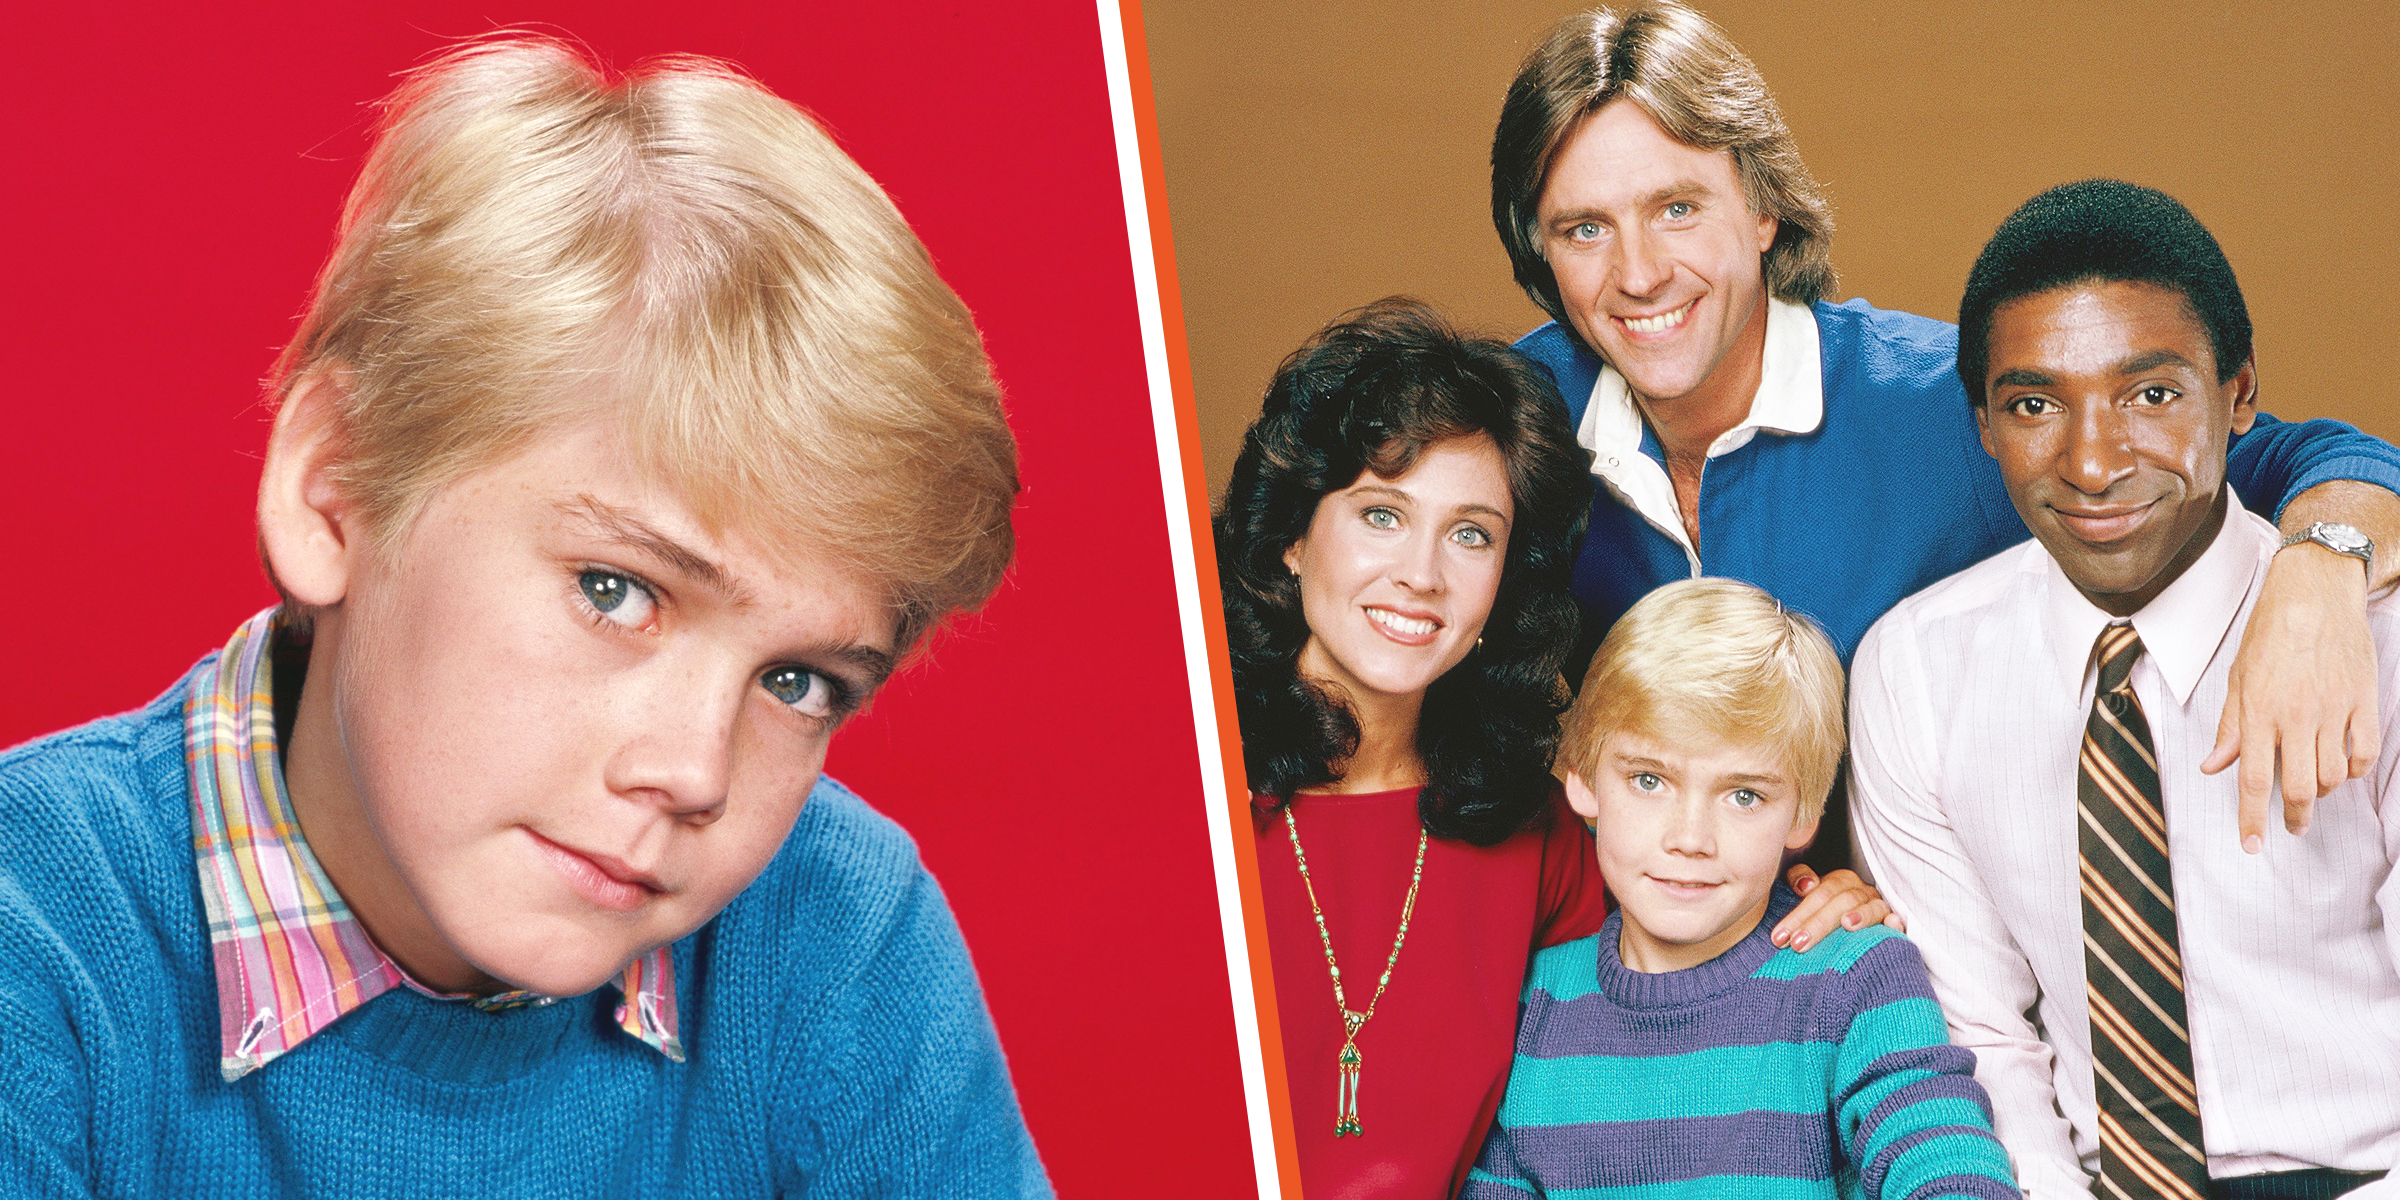 Ricky Schroder | Ricky Schroder and the cast from "Silver Spoons" | Source: Getty Images